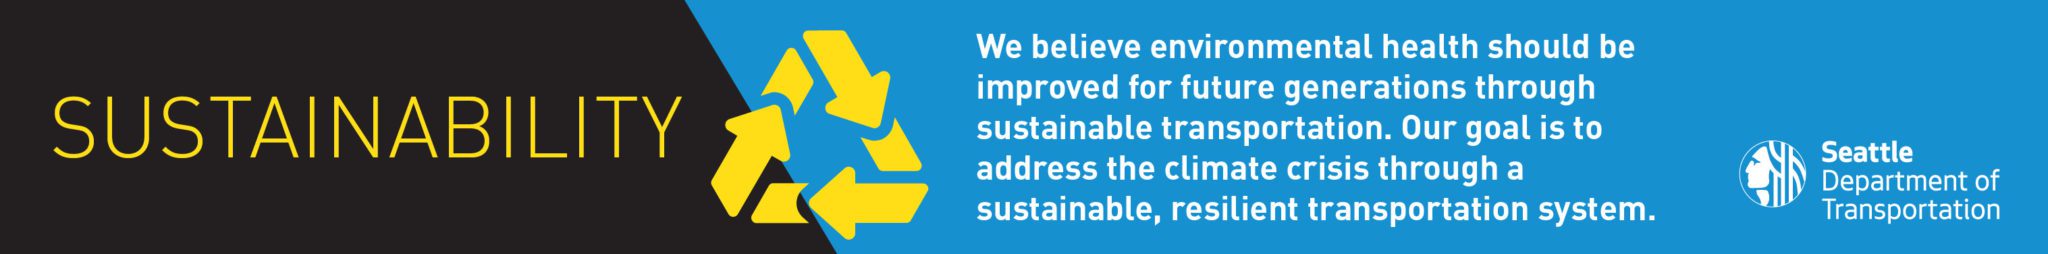 Graphic highlighting sustainability as a core value and goal, including a yellow recycling icon and the SDOT logo.